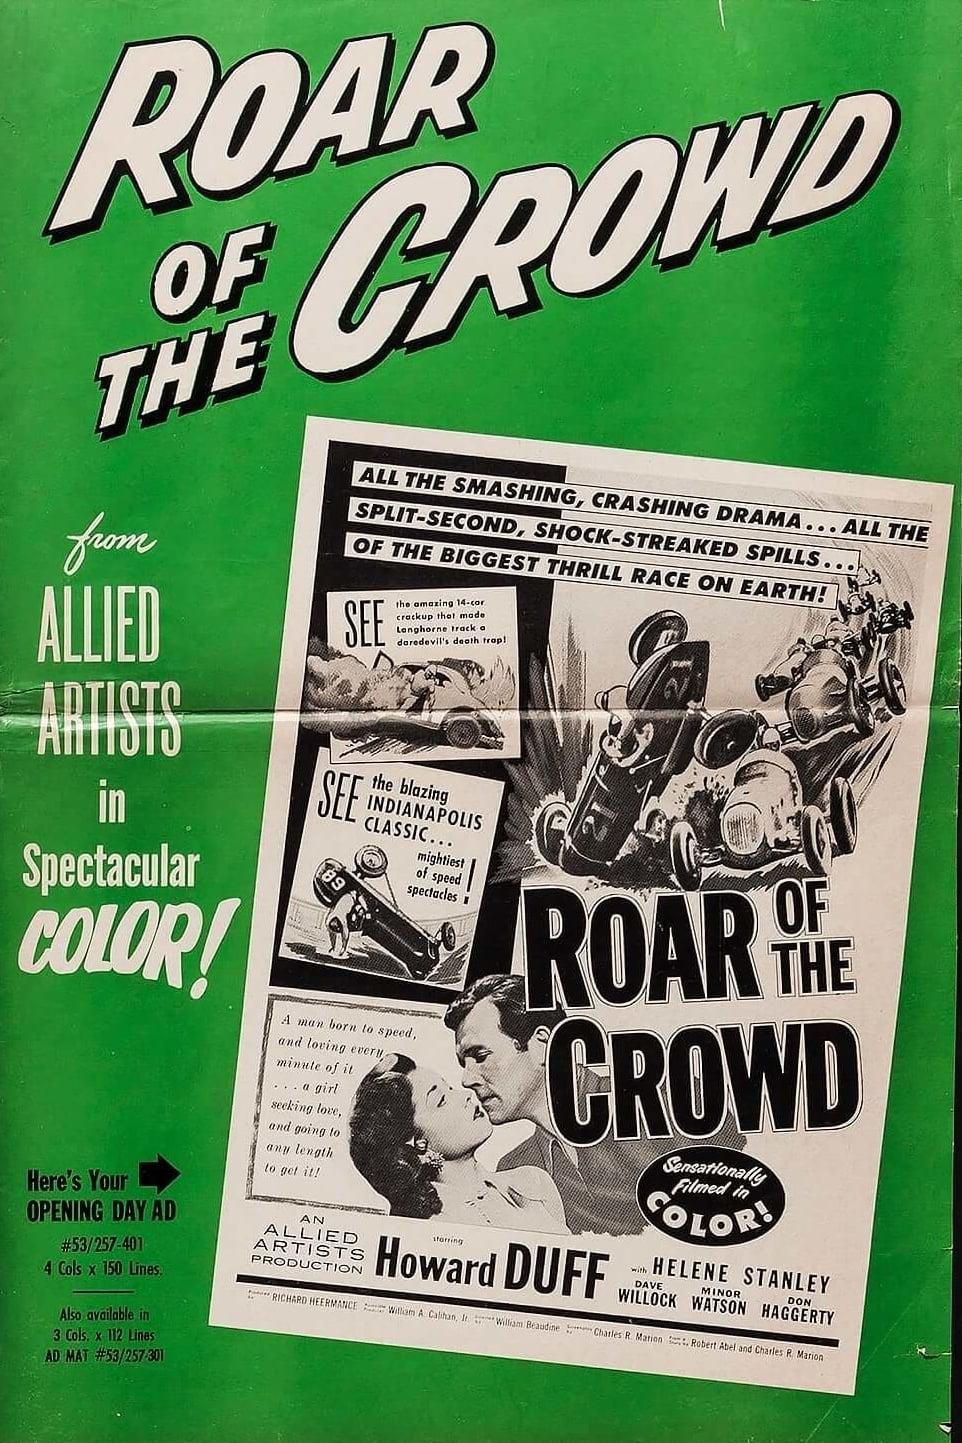 Roar of the Crowd poster